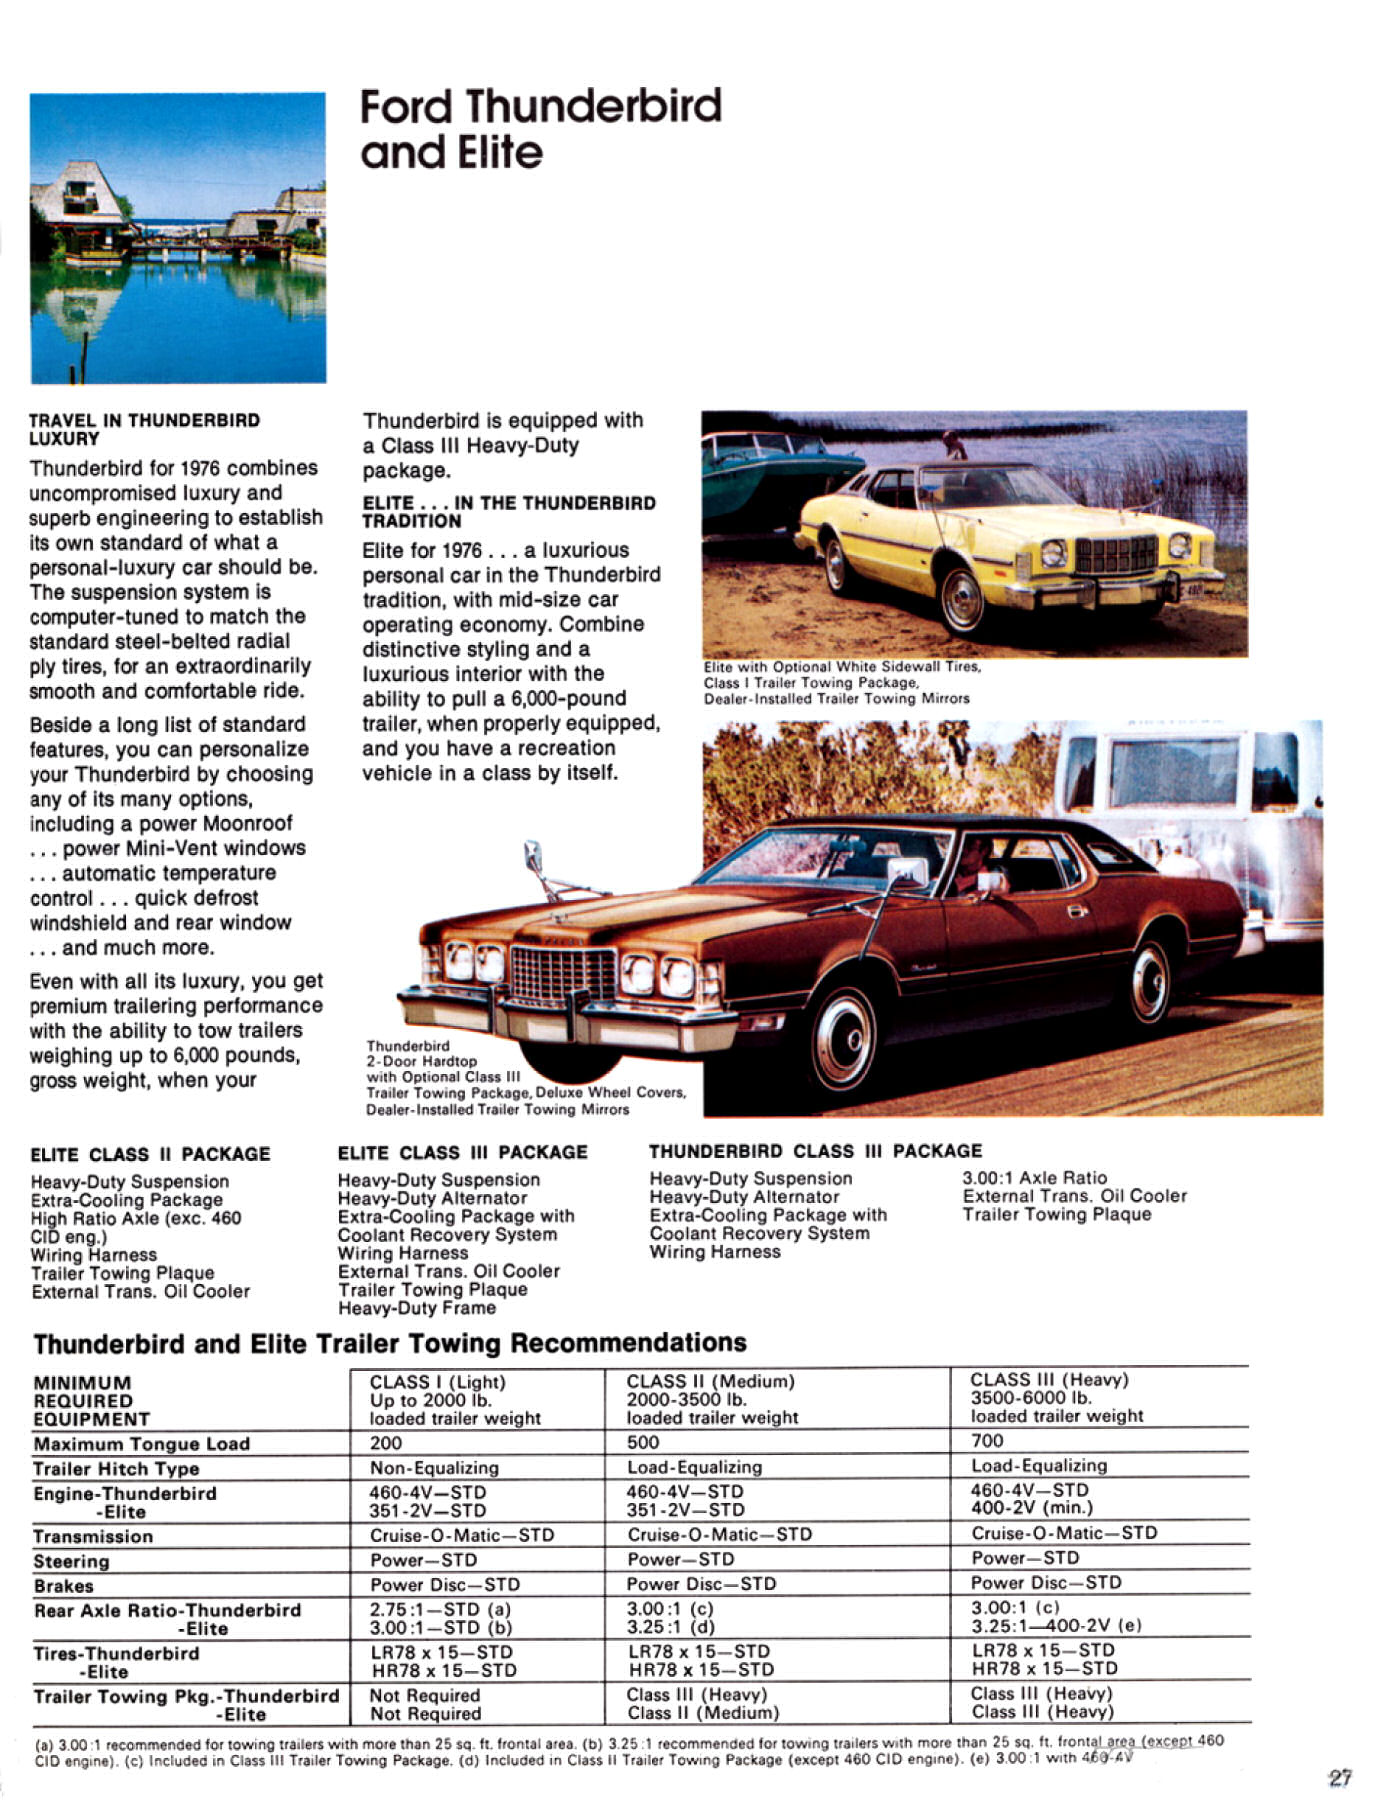 1976 Ford Recreation Vehicles-27